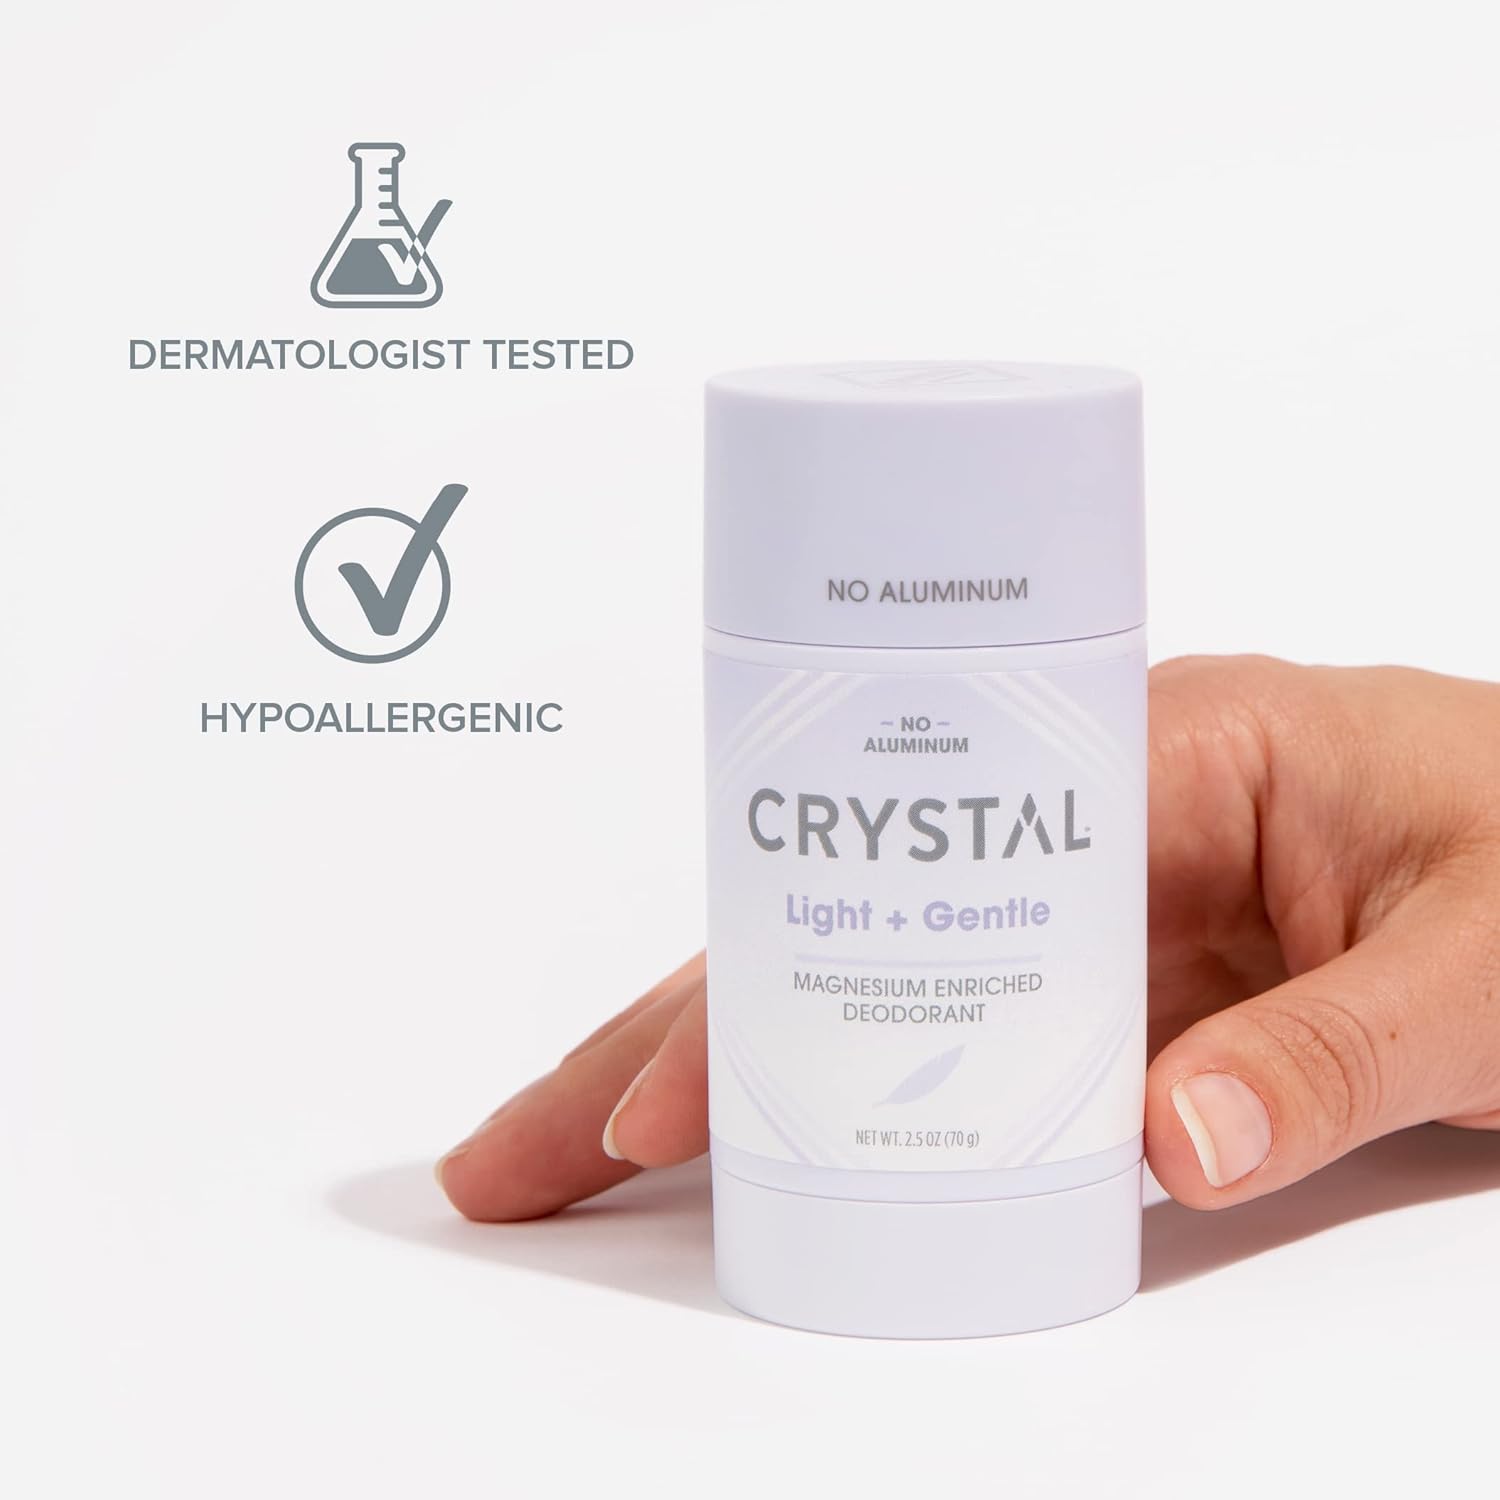 Crystal Magnesium Solid Stick Natural Deodorant, Non-Irritating Aluminum Free Deodorant for Men or Women, Safely and Effectively Fights Odor, Baking Soda Free, Light + Gentle (2.5 oz) 2 Pack : Beauty & Personal Care